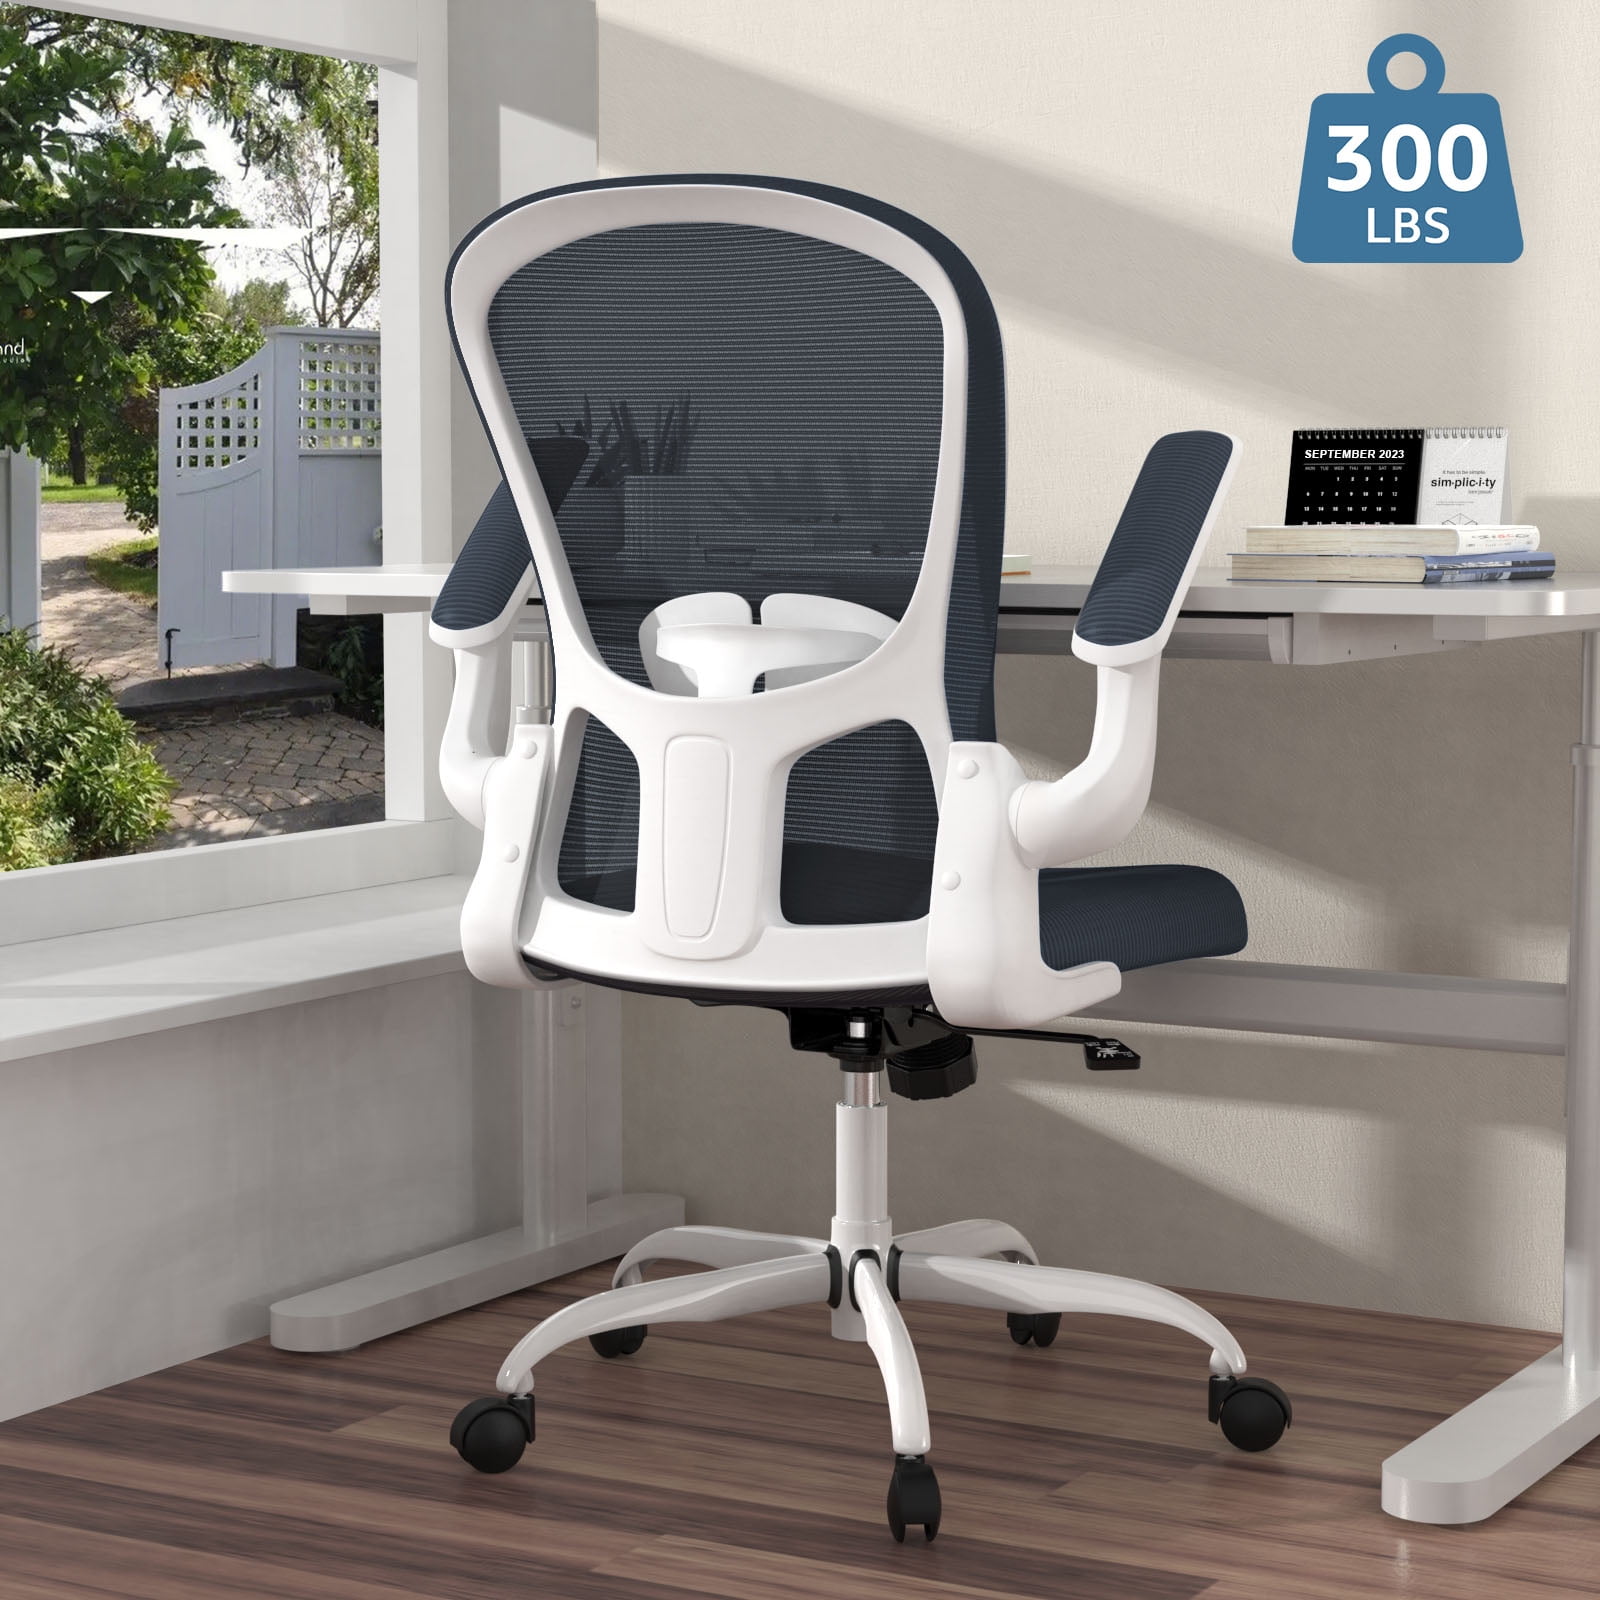 12 Best Ergonomic Office Chairs for Home 2023